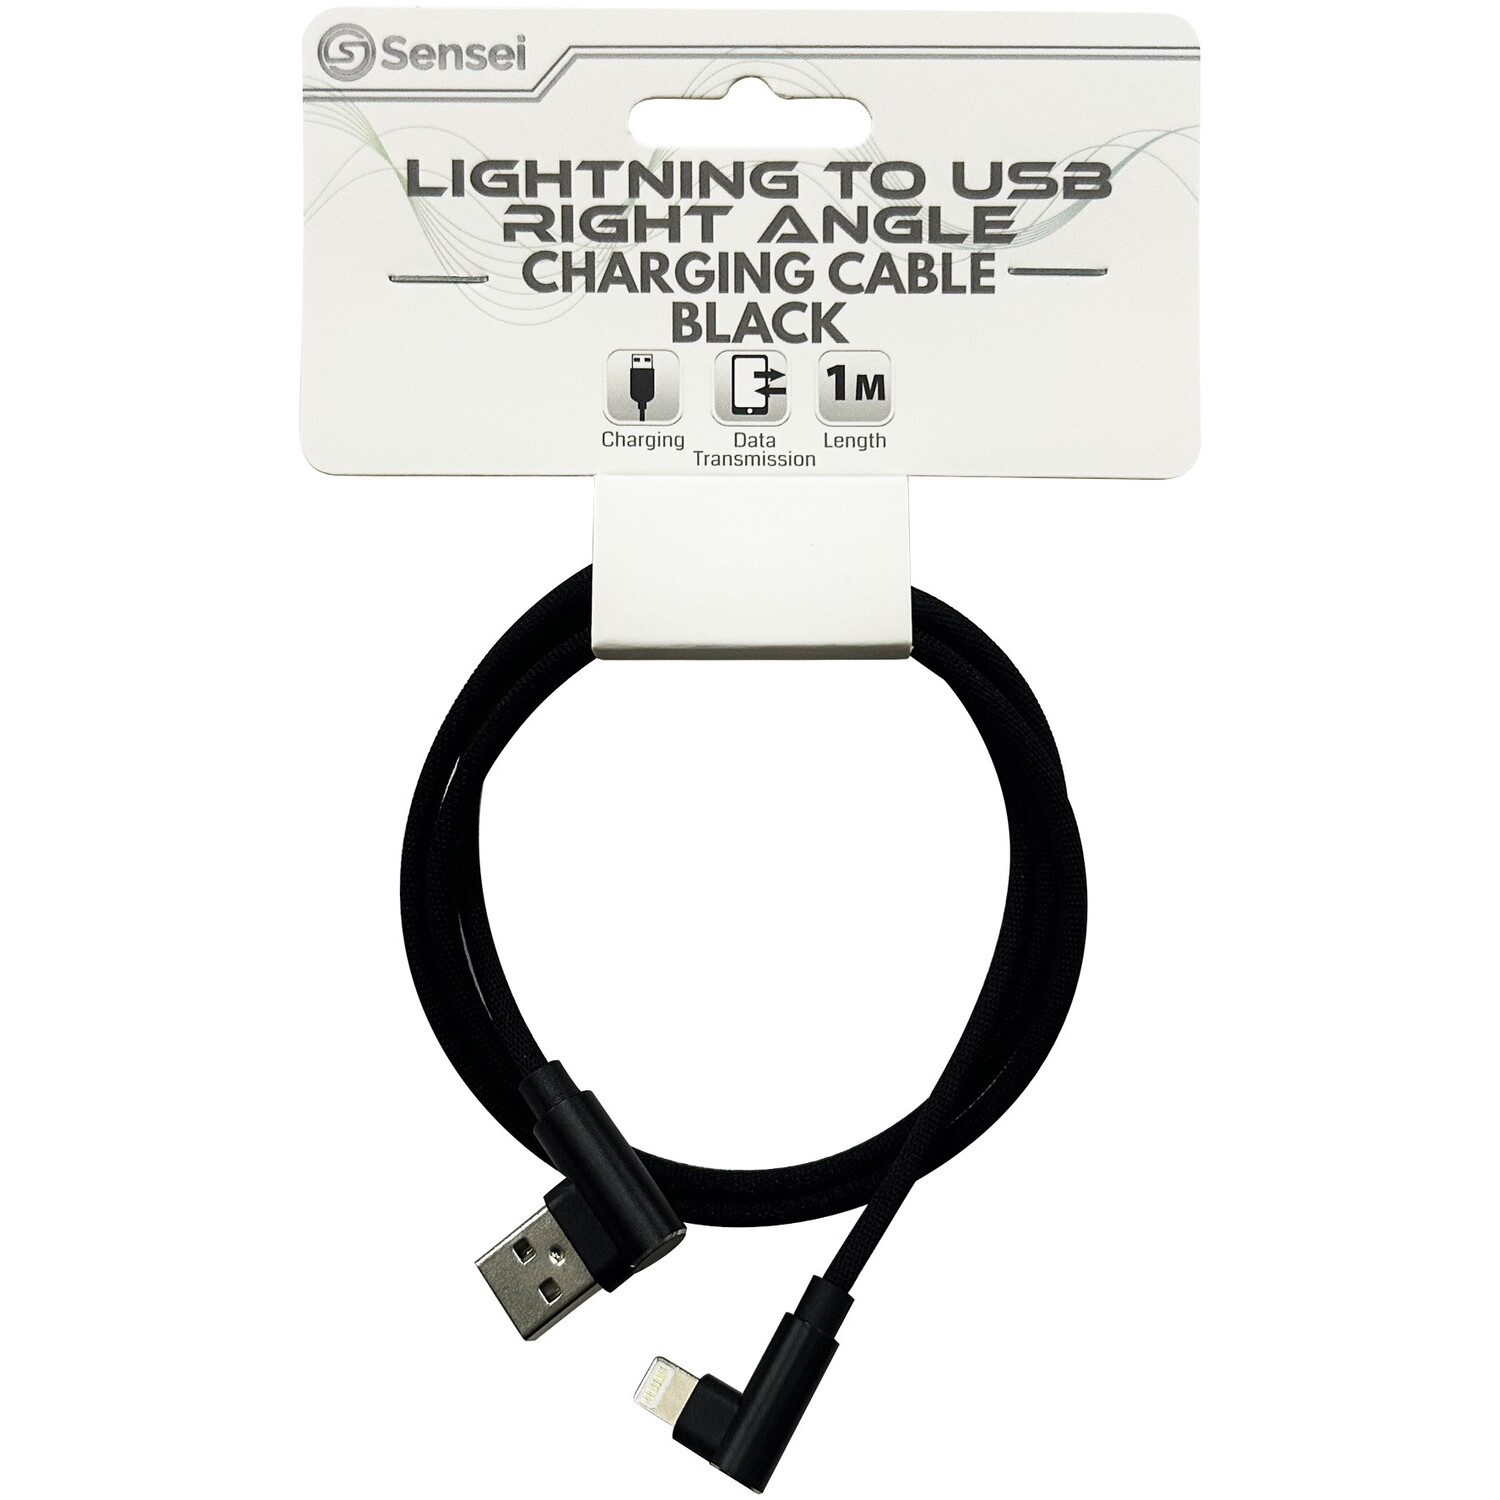 Lightning to USB Right Angle Cable Image